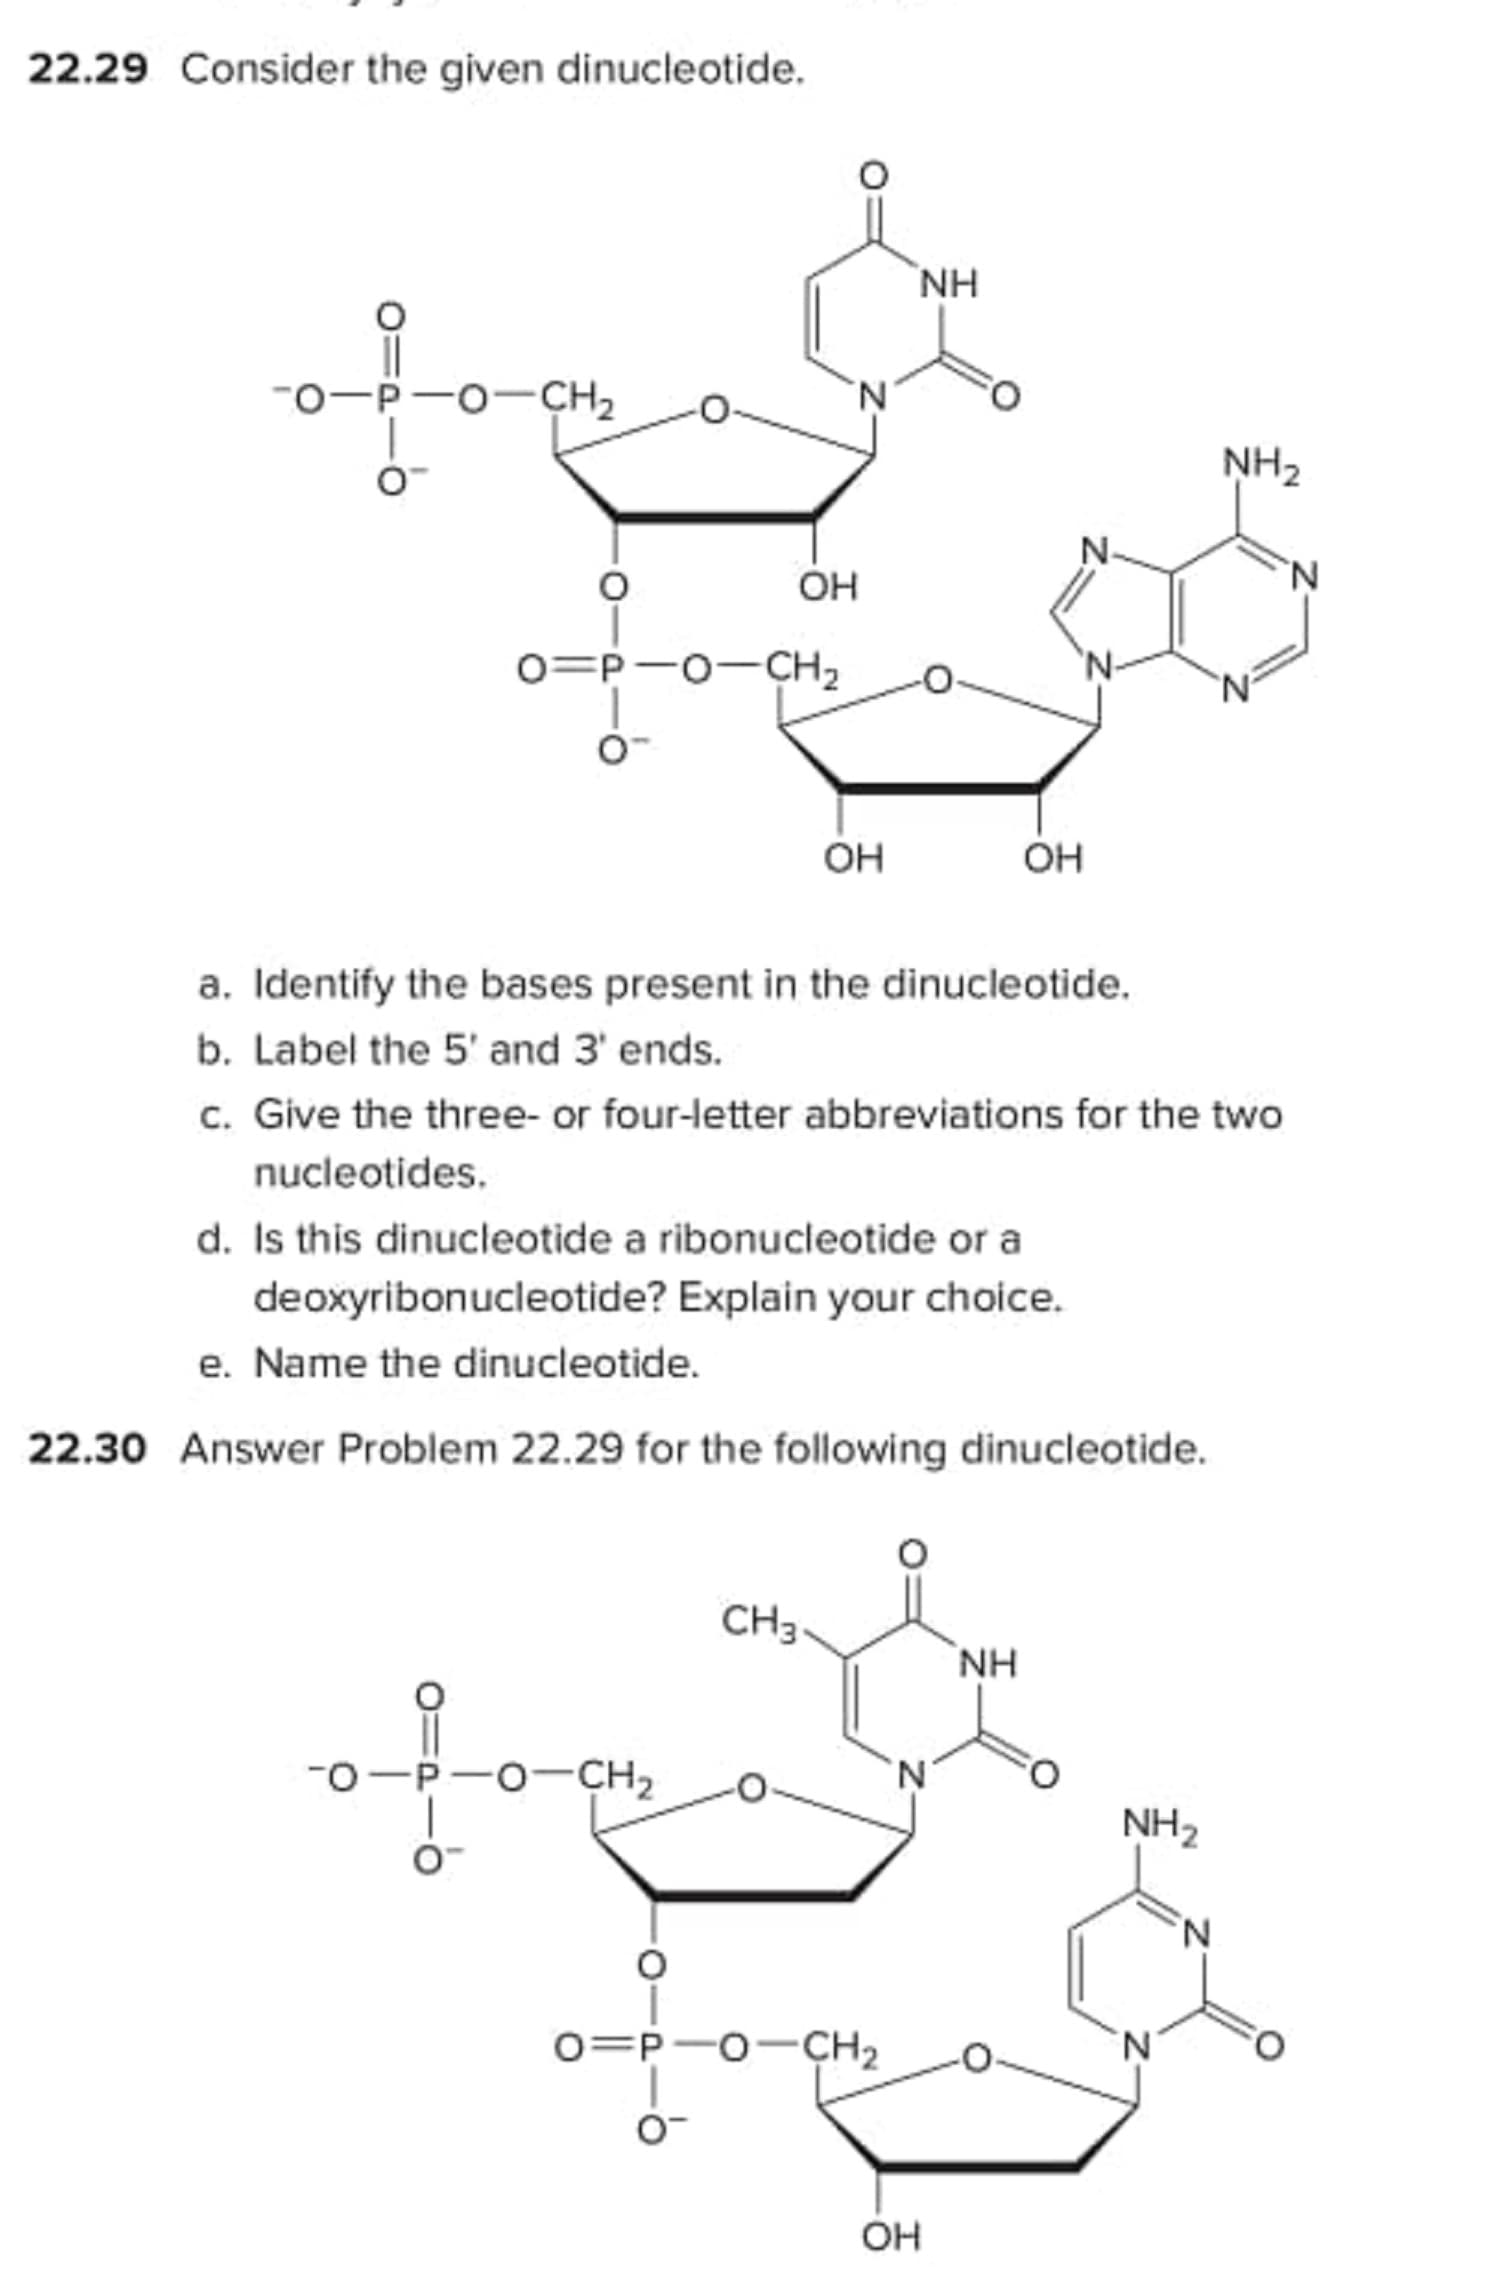 22.29 Consider the given dinucleotide.
NH
-0-P-0-CH2
N.
NH2
N-
Он
0=P-0-CH2
Он
Он
a. Identify the bases present in the dinucleotide.
b. Label the 5' and 3' ends.
c. Give the three- or four-letter abbreviations for the two
nucleotides.
d. Is this dinucleotide a ribonucleotide or a
deoxyribonucleotide? Explain your choice.
e. Name the dinucleotide.
22.30 Answer Problem 22.29 for the following dinucleotide.
CHз
NH
O-
-o-CH2
N'
NH2
N.
0=P-0-CH2
N.
OH
